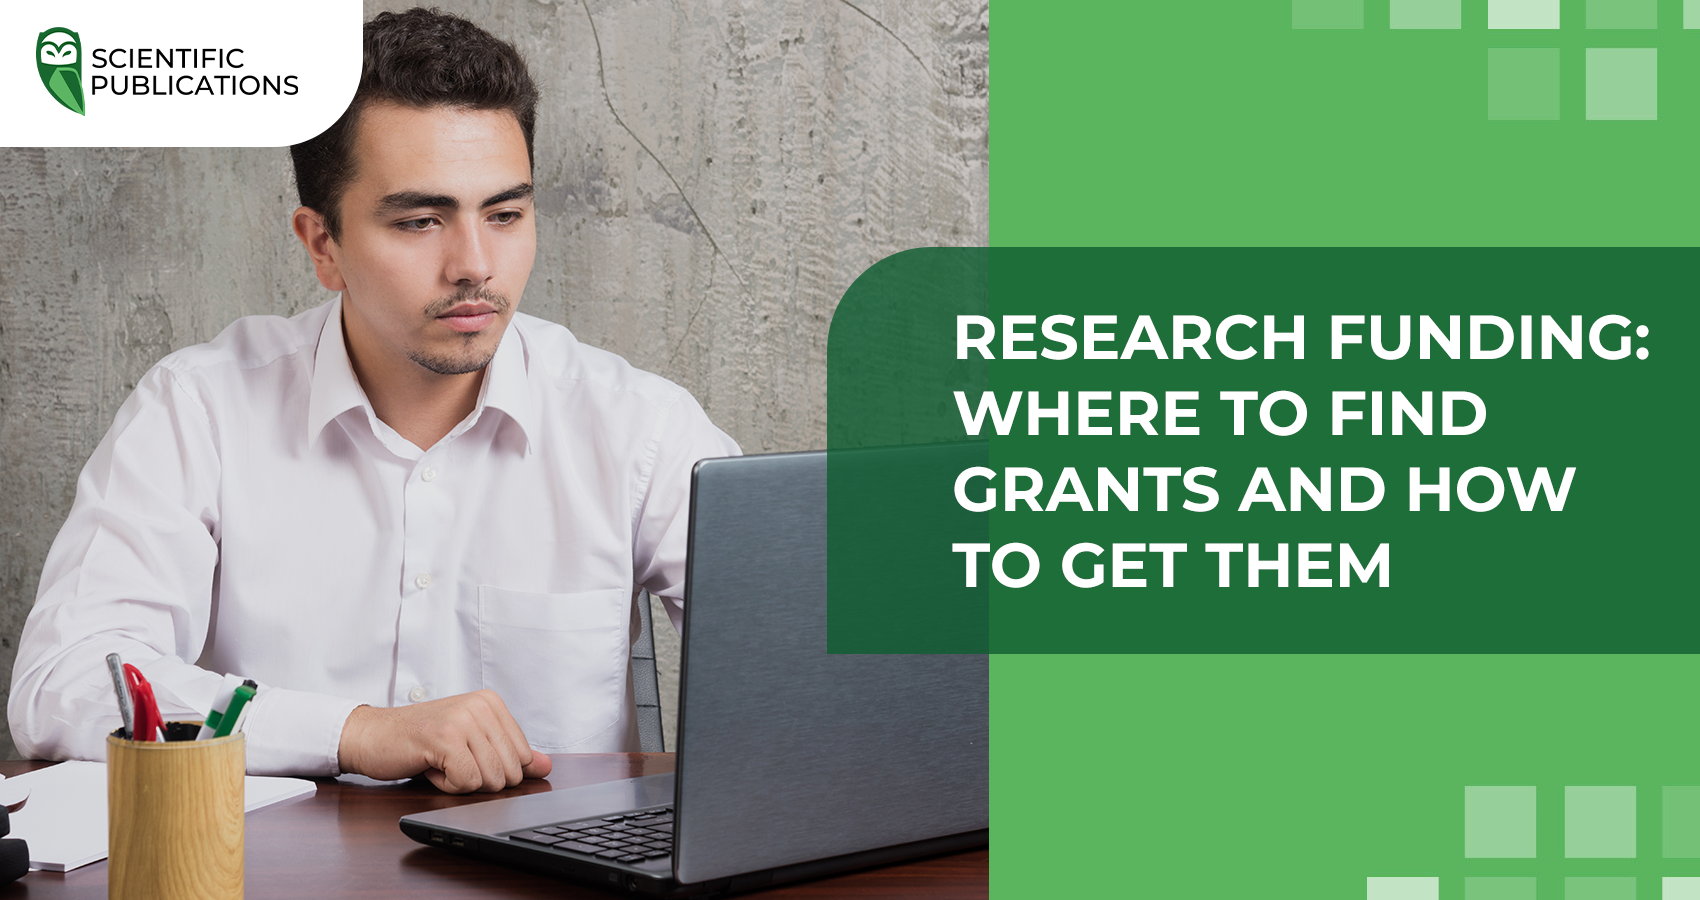 Research funding: where to find grants and how to get them